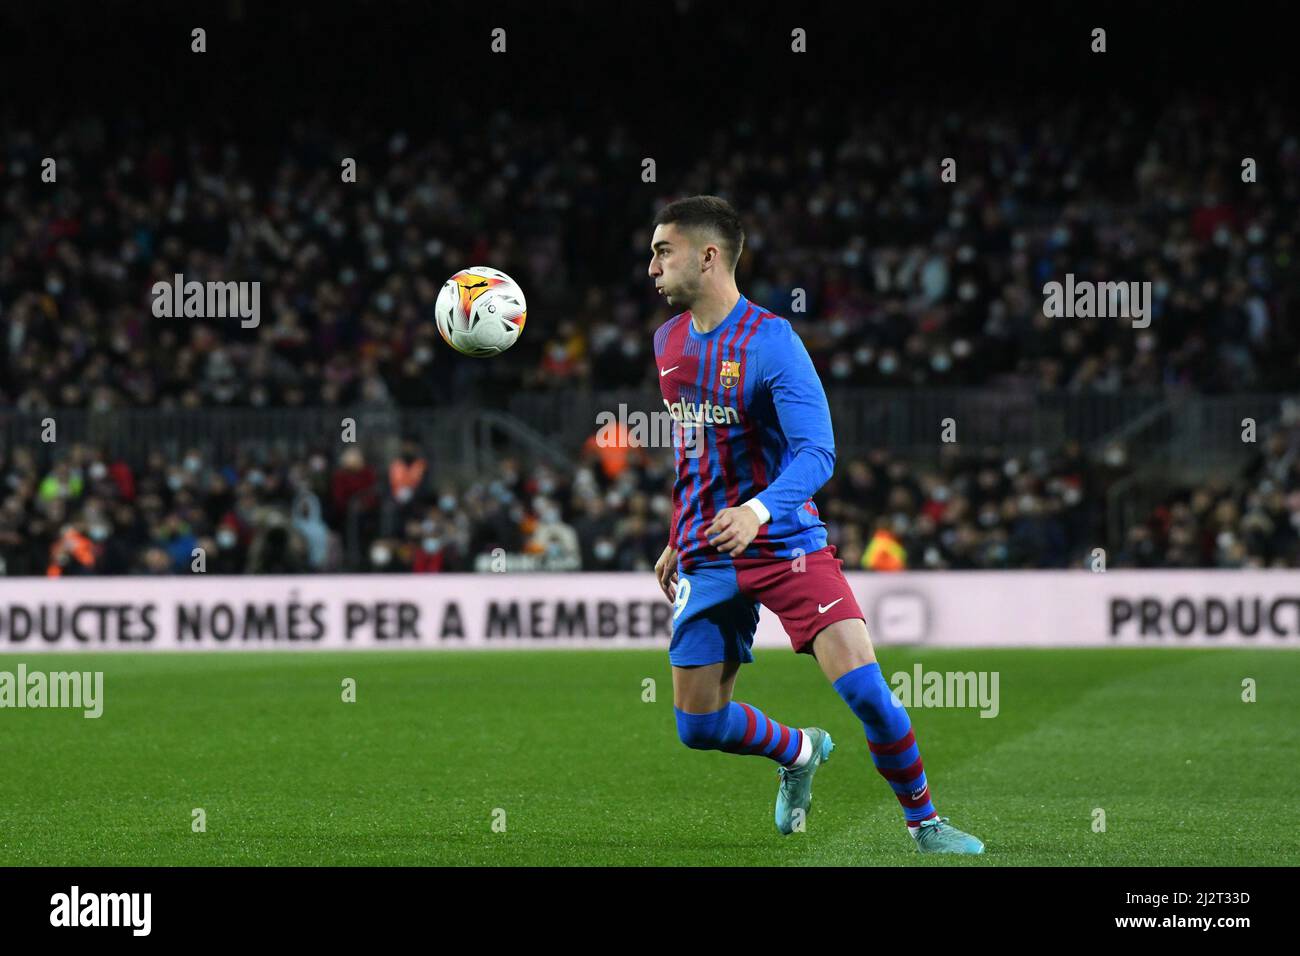 BARCELONA, SPAIN - APRIL 3: Ferran Torres of FC Barcelona controls the ball during La Liga match between FC Barcelona and Sevilla FC at Campo Nou on April 3, 2022 in Barcelona, Spain. (Photo by Sara Aribó/Pximages) Credit: Px Images/Alamy Live News Stock Photo